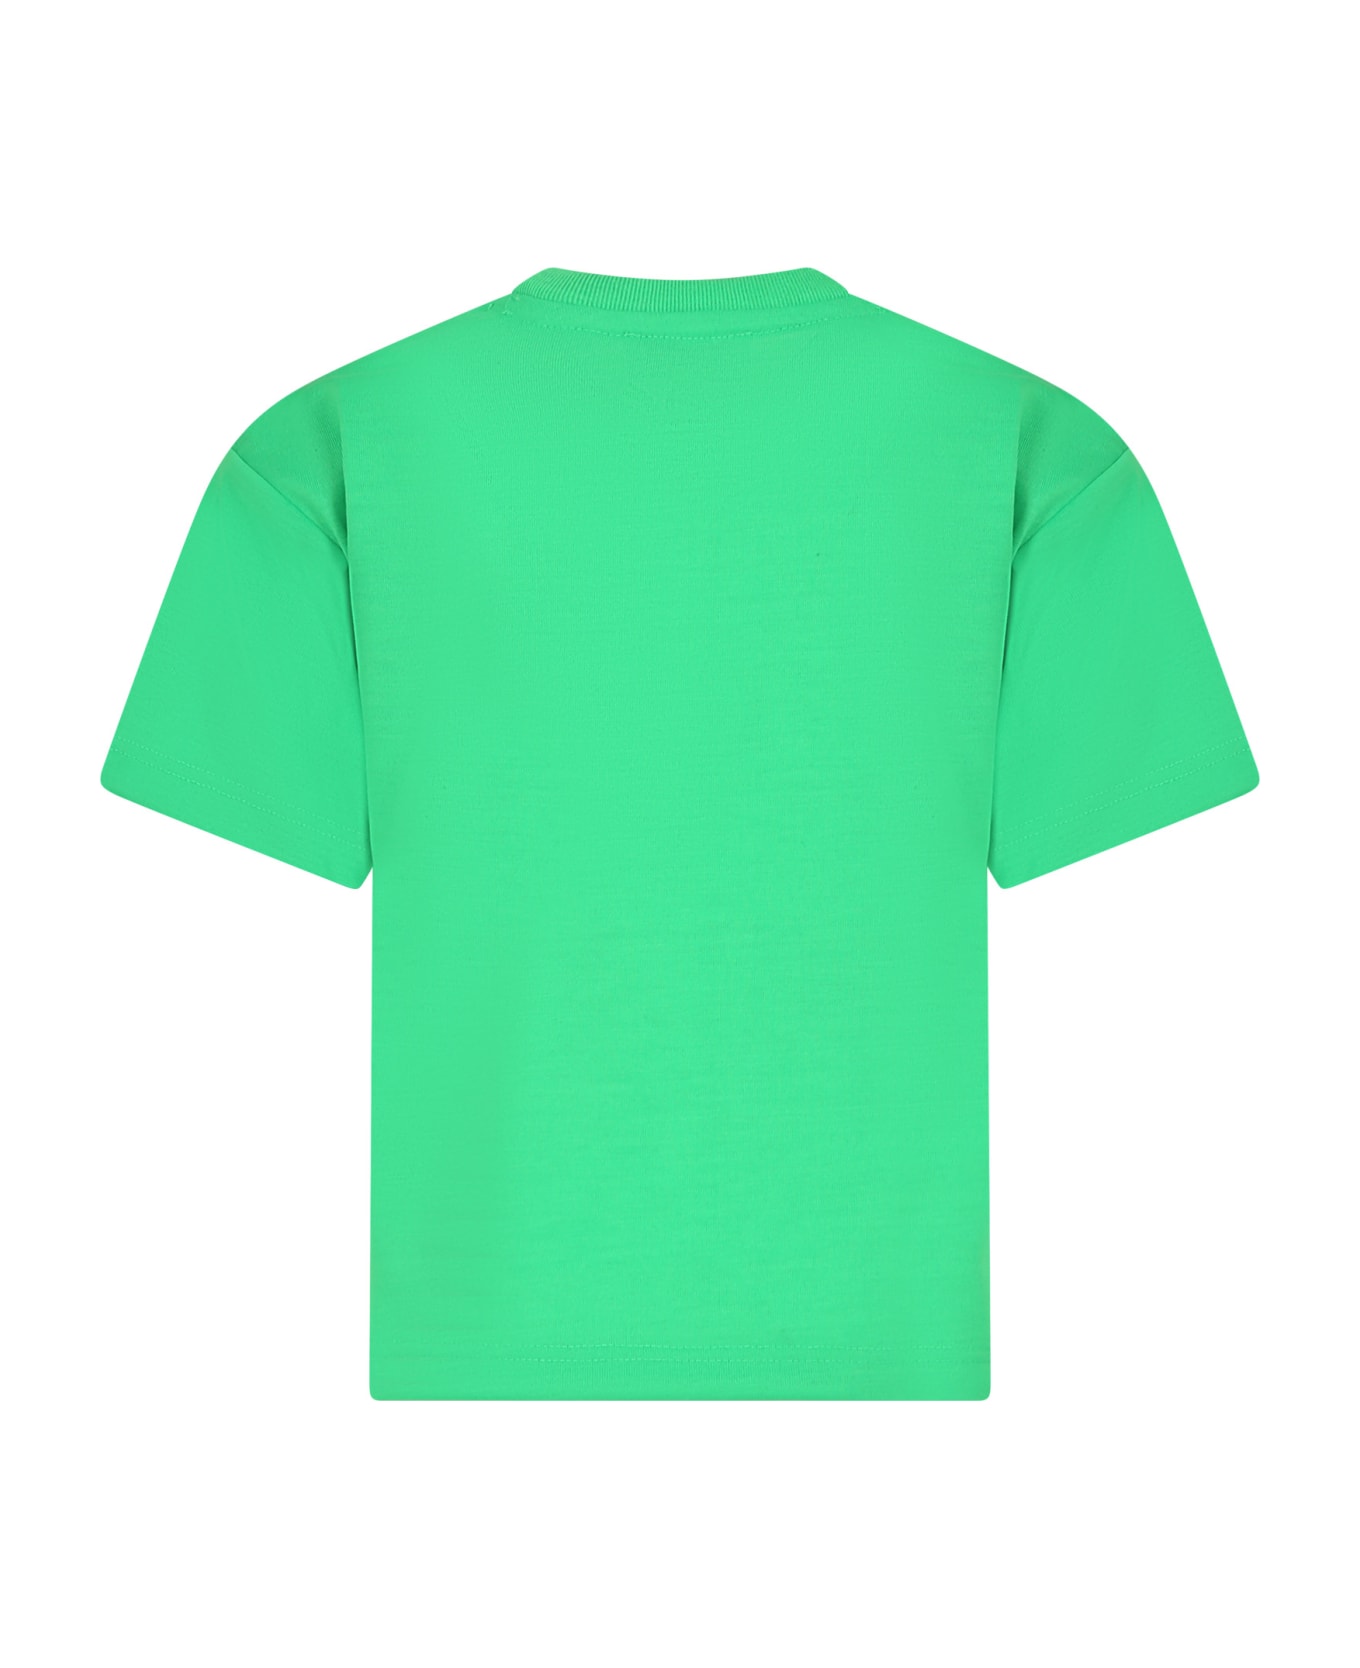 Marc Jacobs Green T-shirt For Kids With Logo - Blue